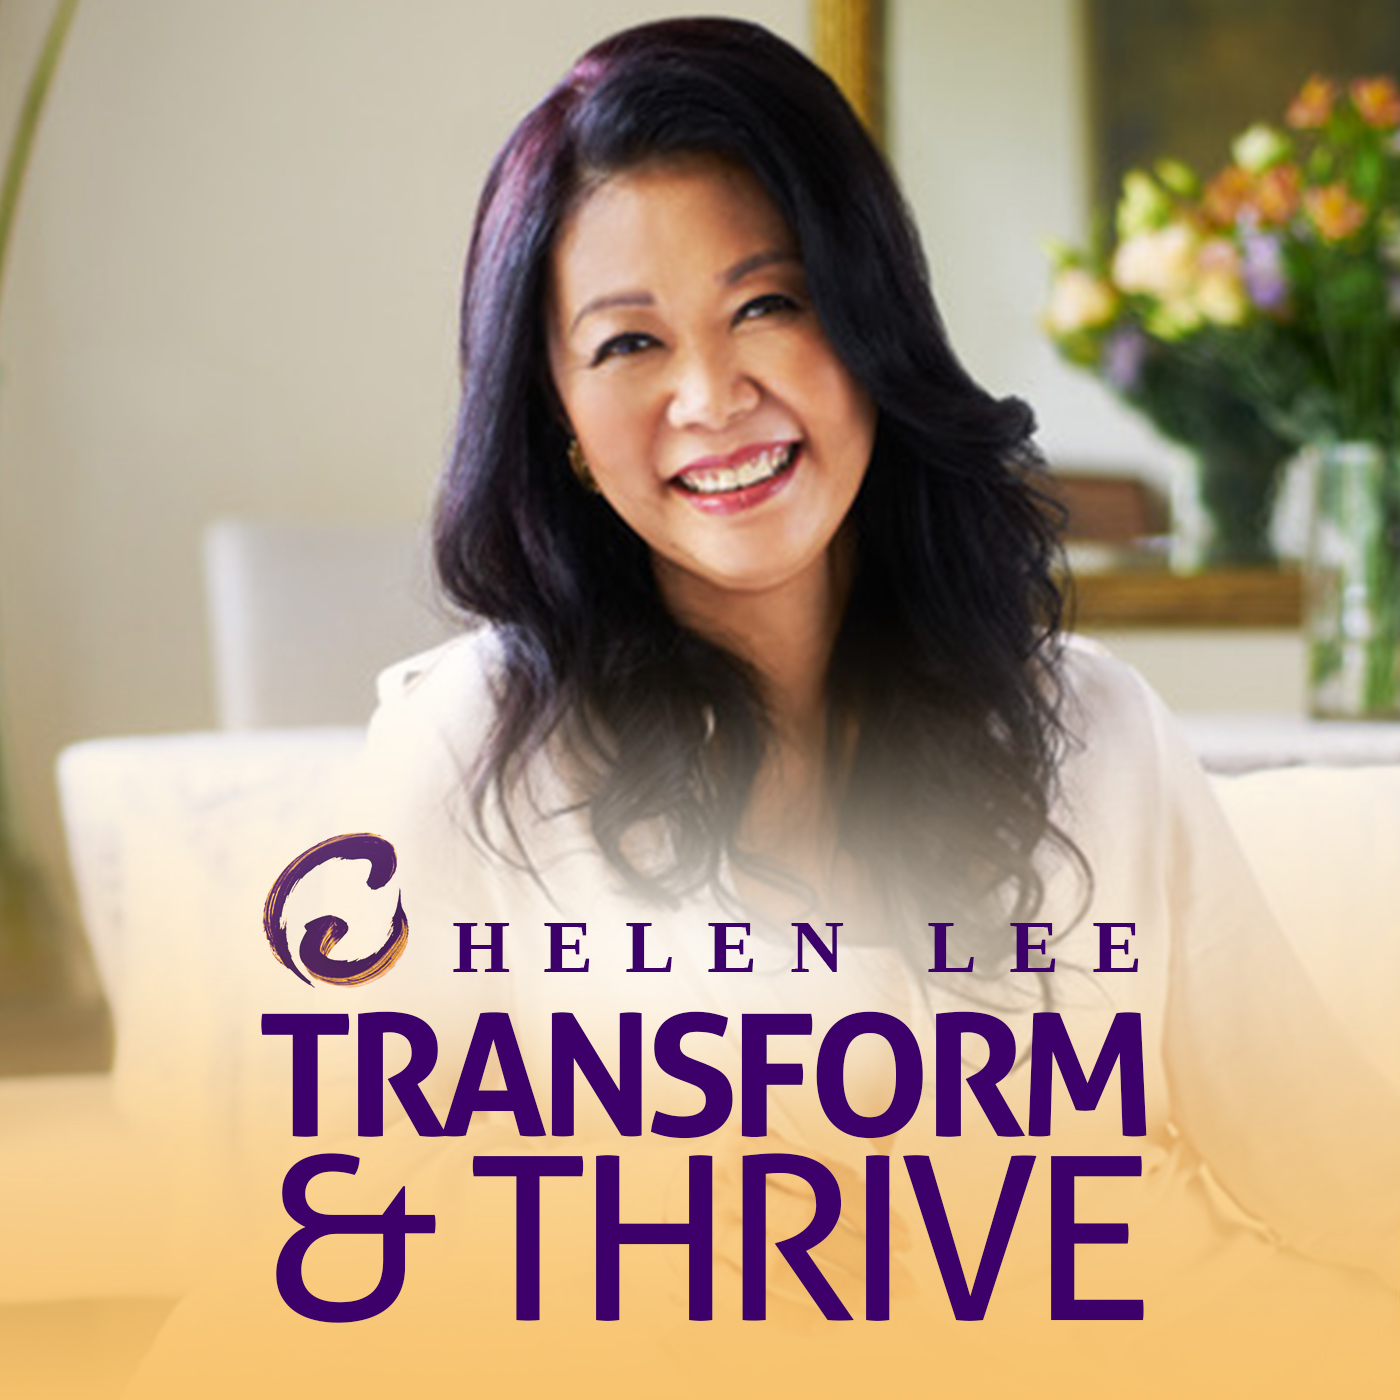 Being Better & Benefitting All - with Pamela Chng, Part 2